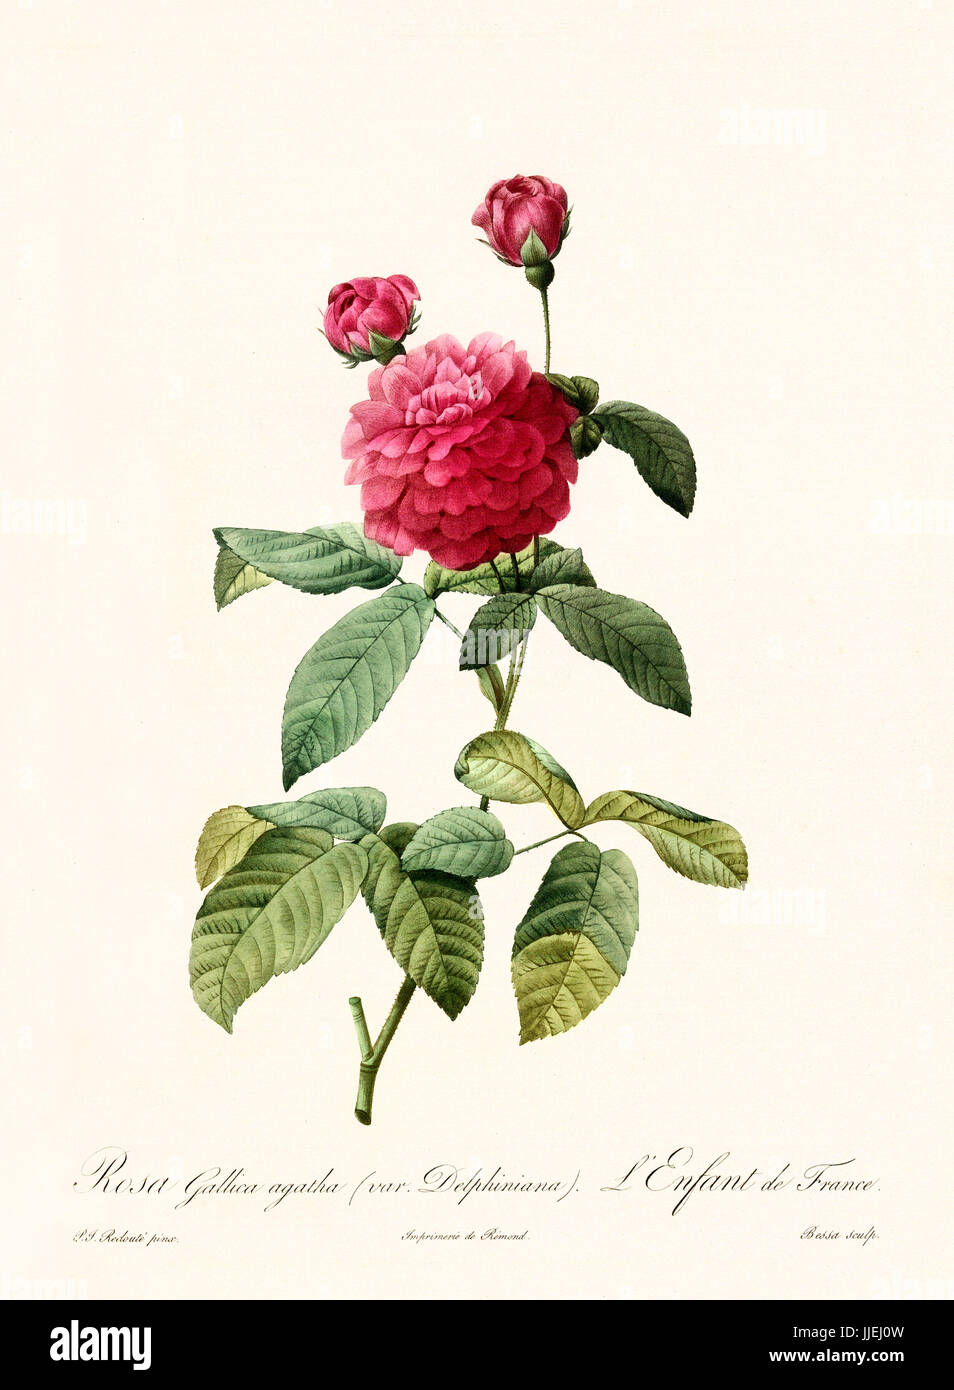 Old illustration of Rosa gallica agatha delphiniana. Created by P. R. Redoute, published on Les Roses, Imp. Firmin Didot, Paris, 1817-24 Stock Photo